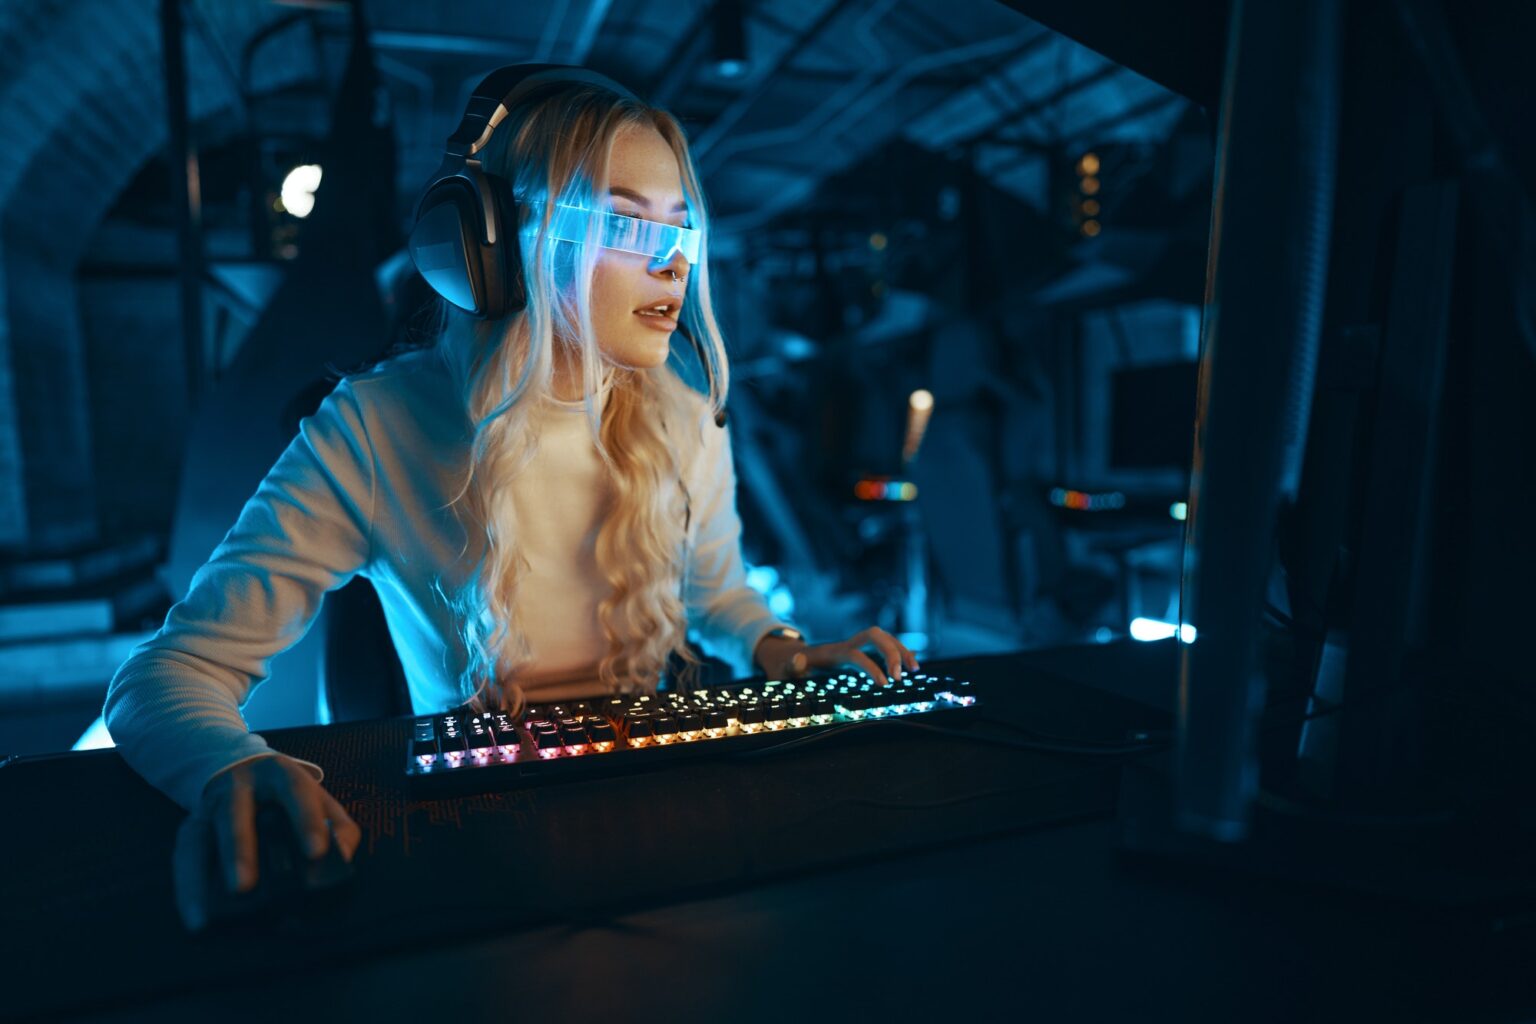 Blonde in cyberpunk glasses plays computer games, fascinated by technology and the virtual world.